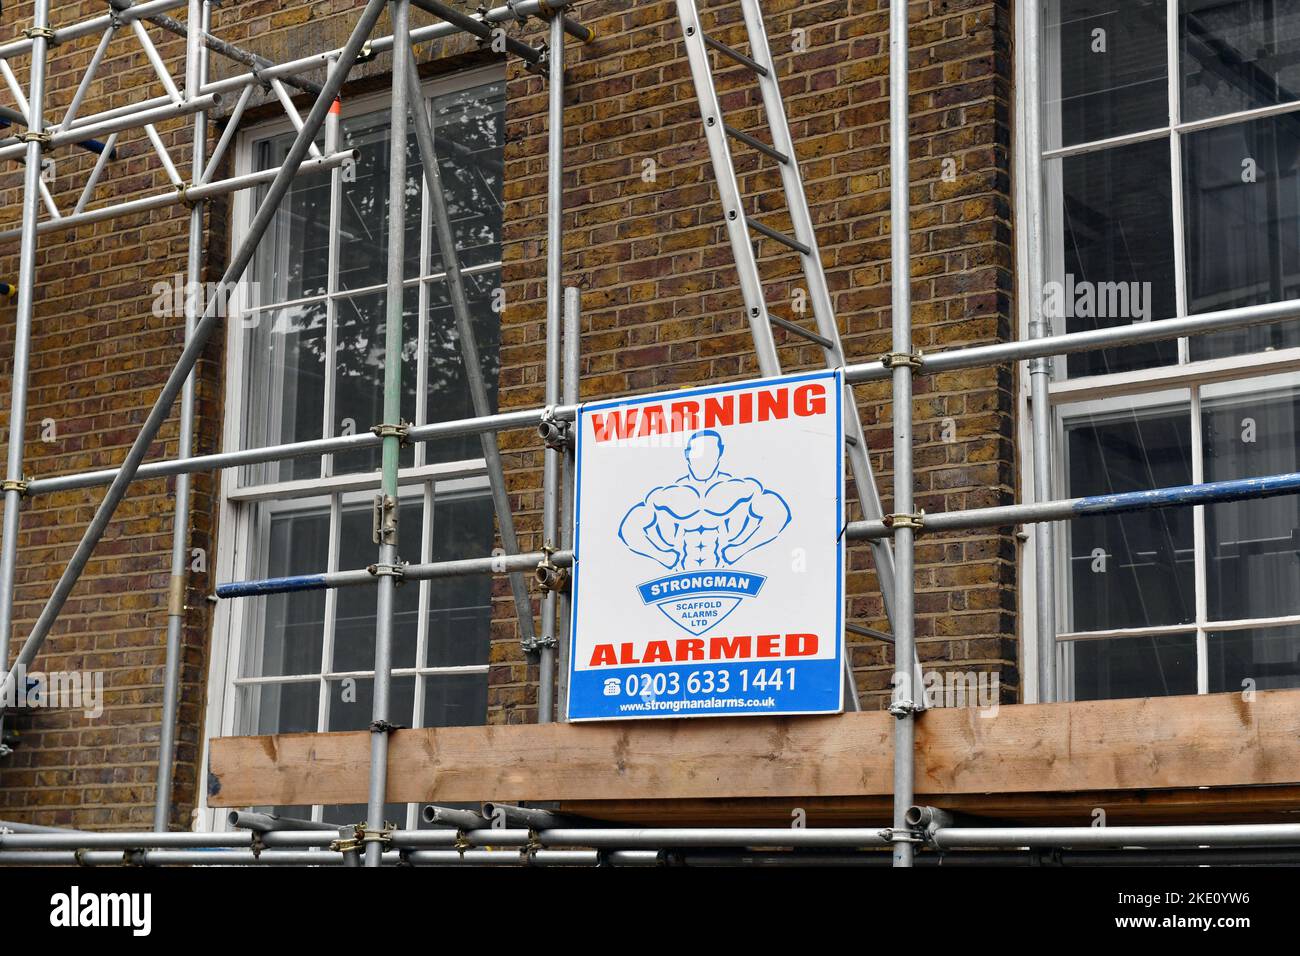 Scaffolding under alarm on a building in London - England Stock Photo